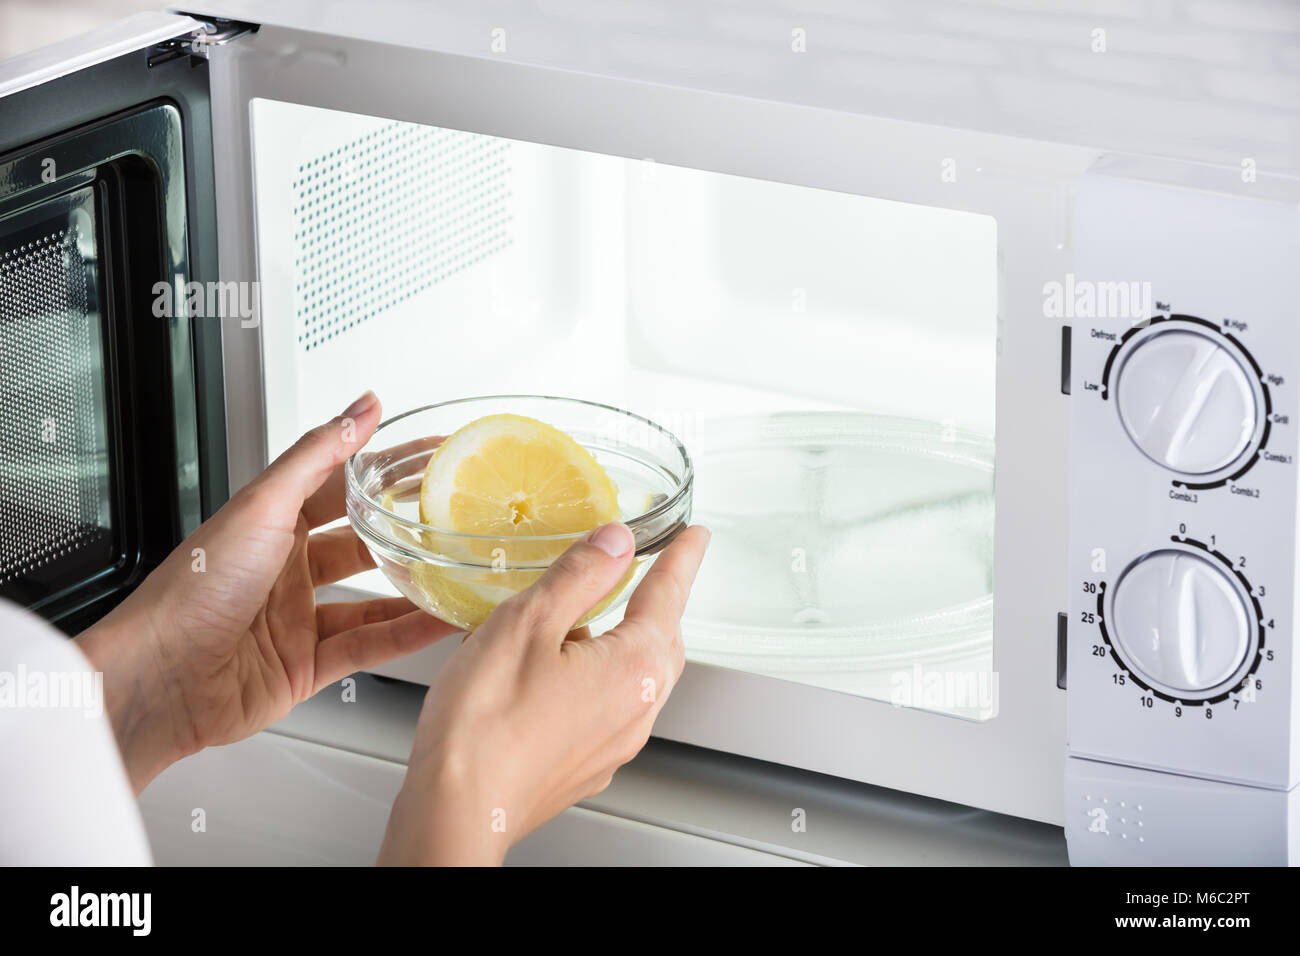 Close-up Of Woman Putting Bowl Of Slice Lemon In Microwave Oven Stock Photo